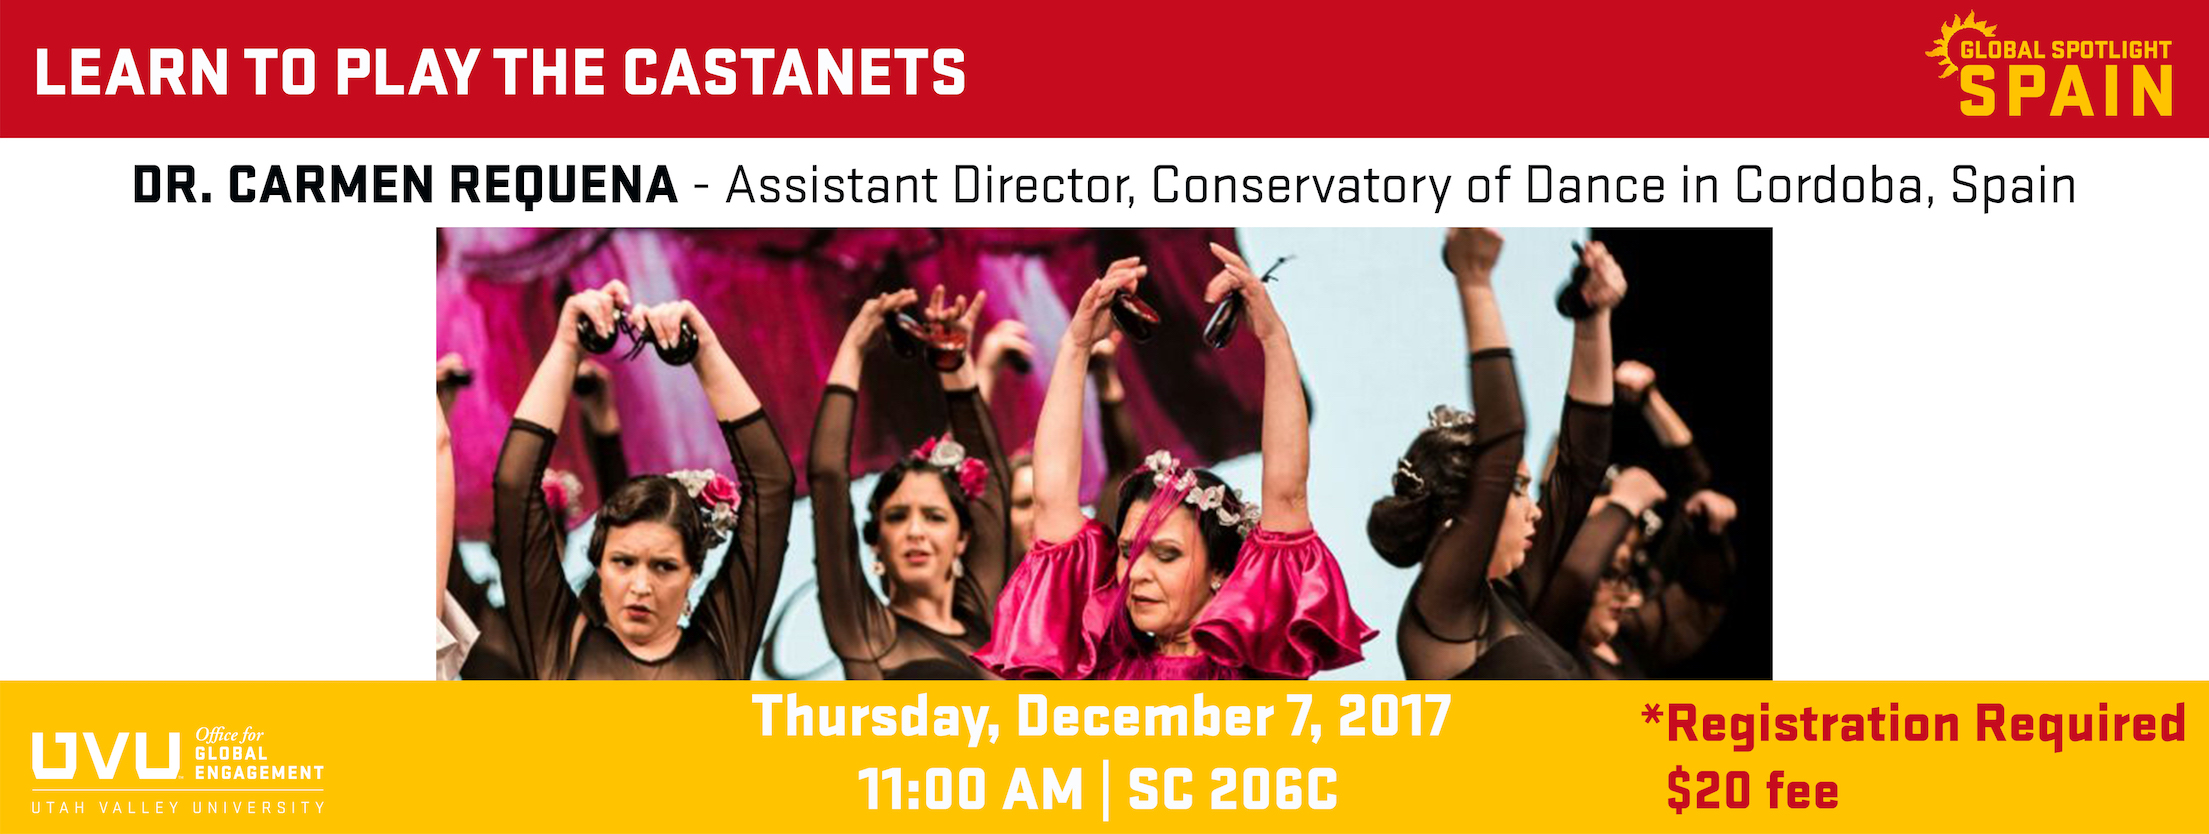 Learn to Play Castanets Banner. Image of a group of women playing the castanets. Text on the image says: Learn to Play the Castanets. Dr. Carmen Requena - Assistant Director, Conservatory of Dance in Cardoba, Spain. Thursday, December 7, 2017. 11:00 AM | SC 206 c. * Registration Required, $20 Fee